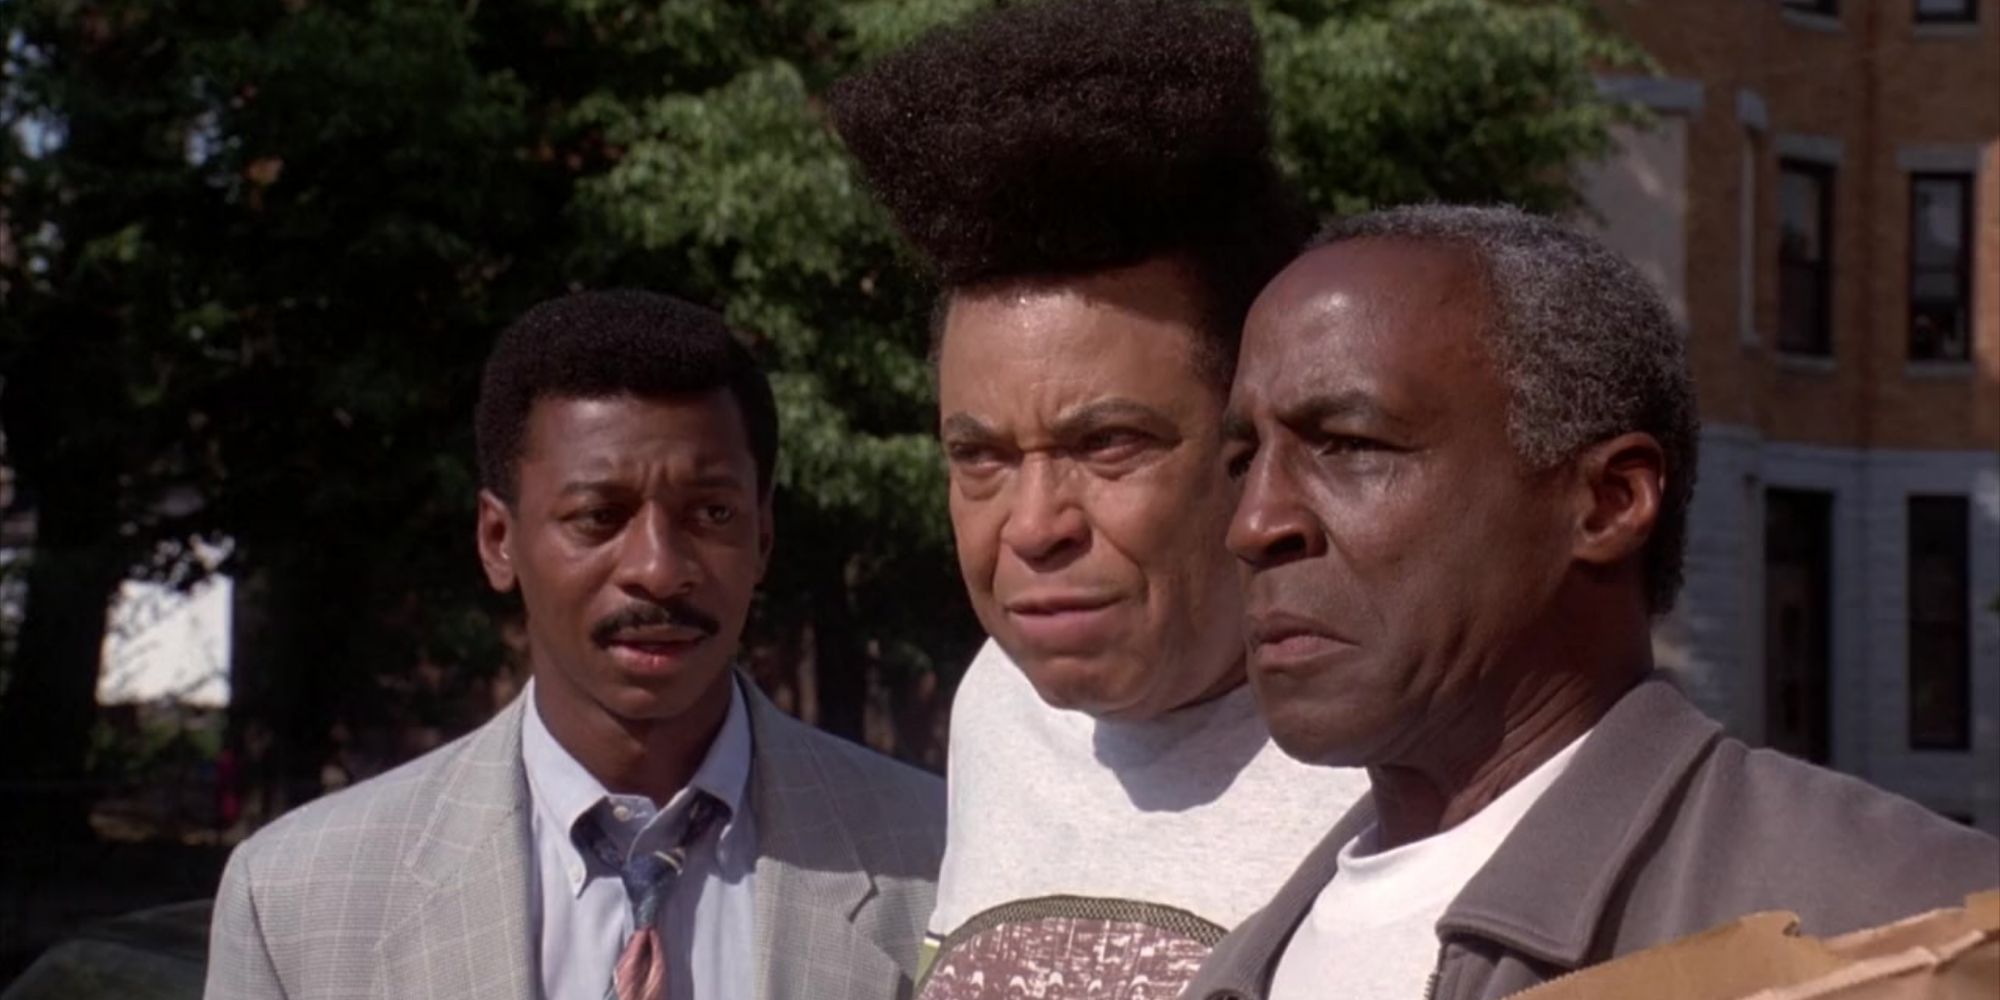 Robert Townsend looking concerned 